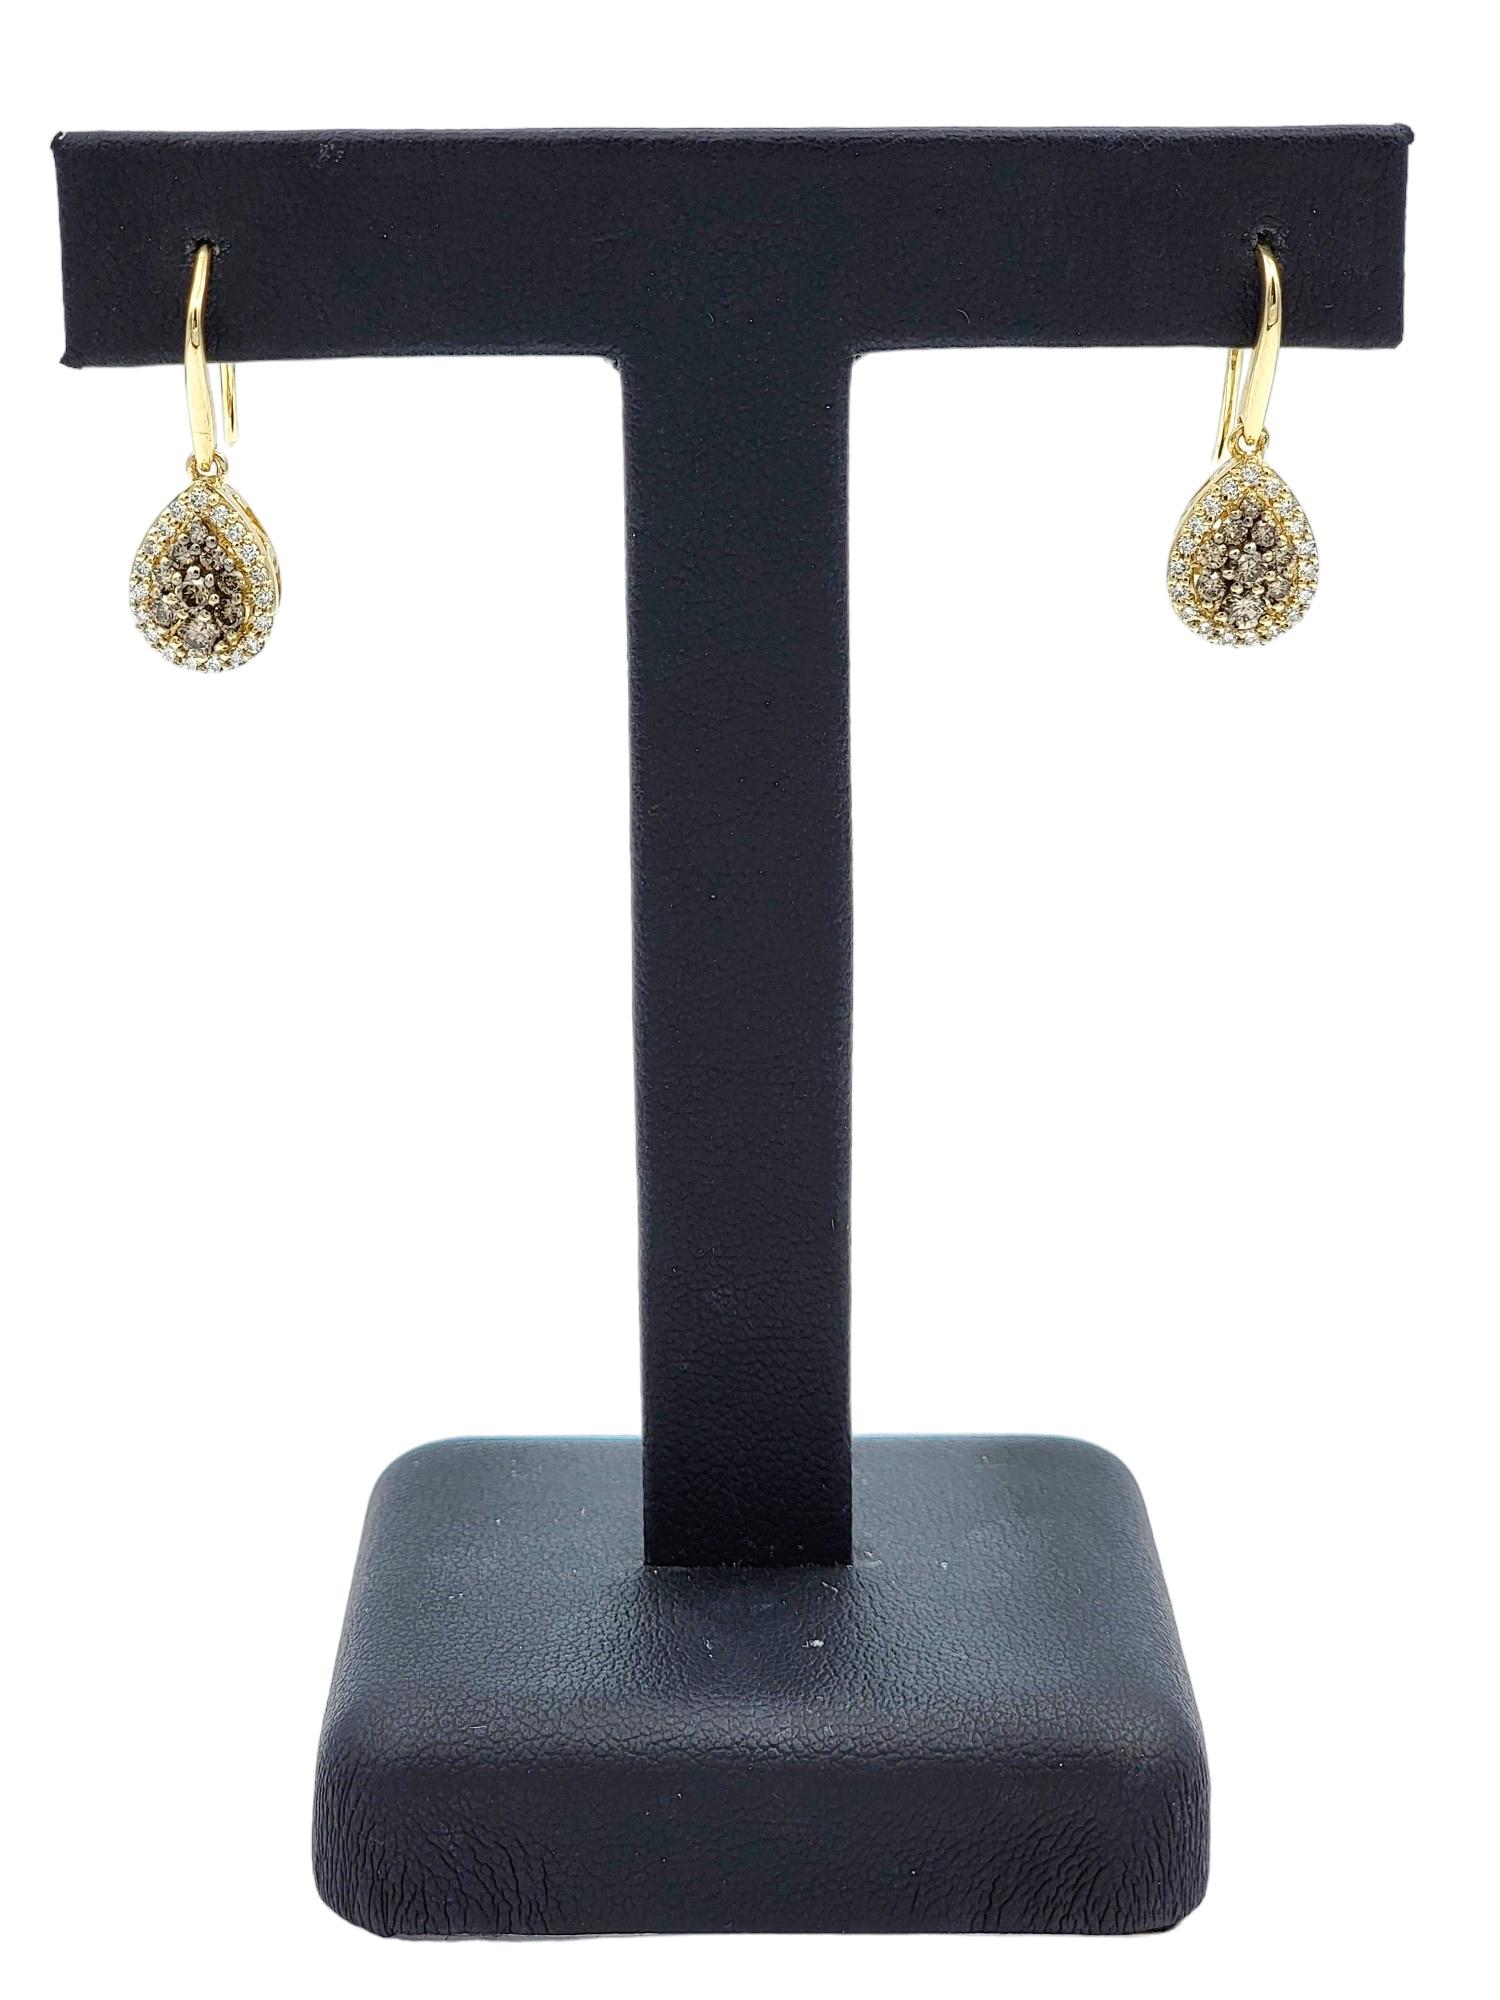 Women's Le Vian Chocolate and White Diamond Dangle Earrings Set in 14 Karat Yellow Gold For Sale